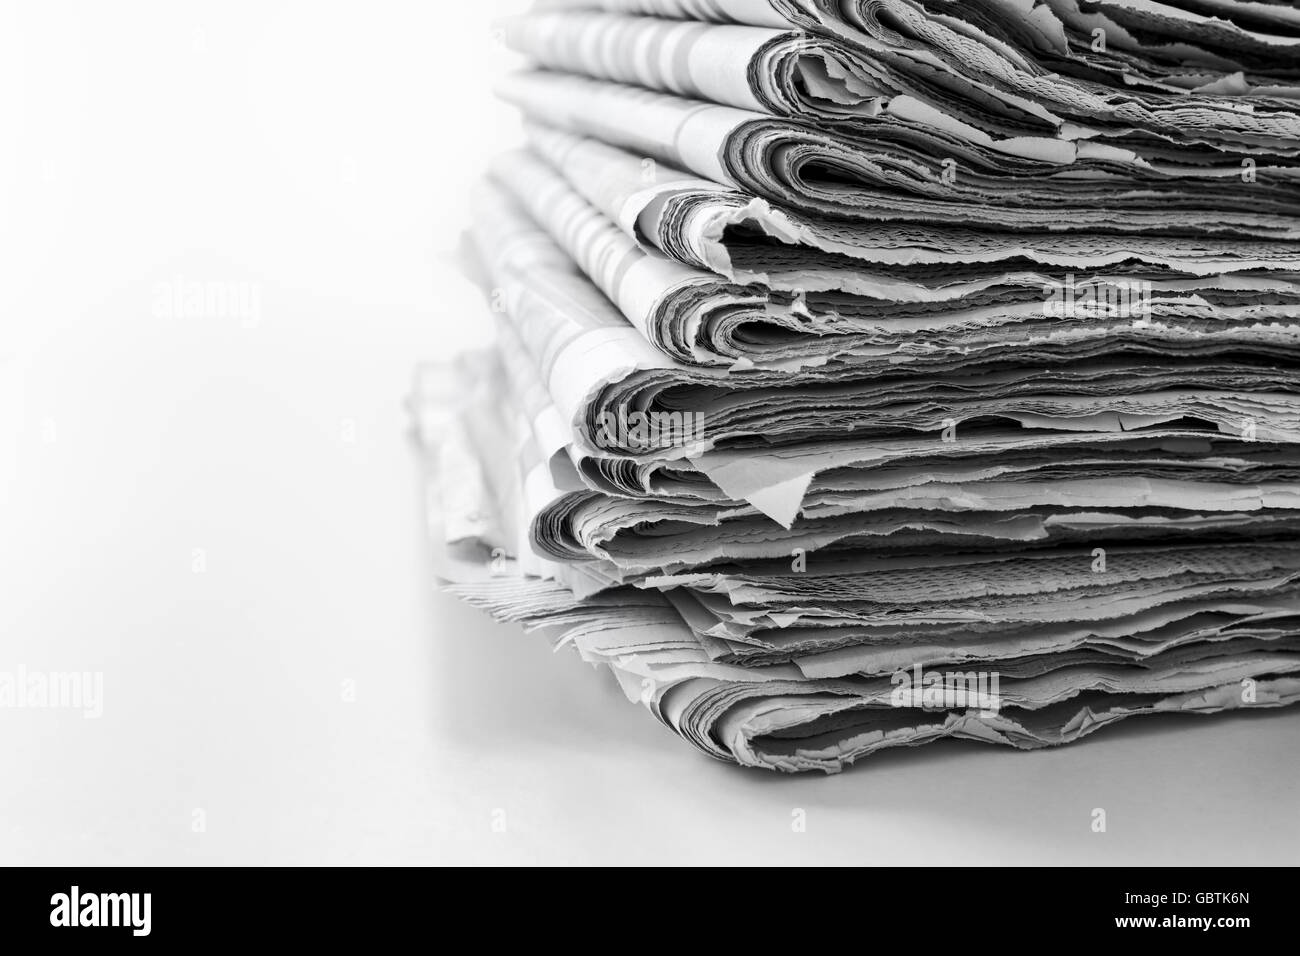 Newspapers folded and stacked concept for global communications and the media Stock Photo